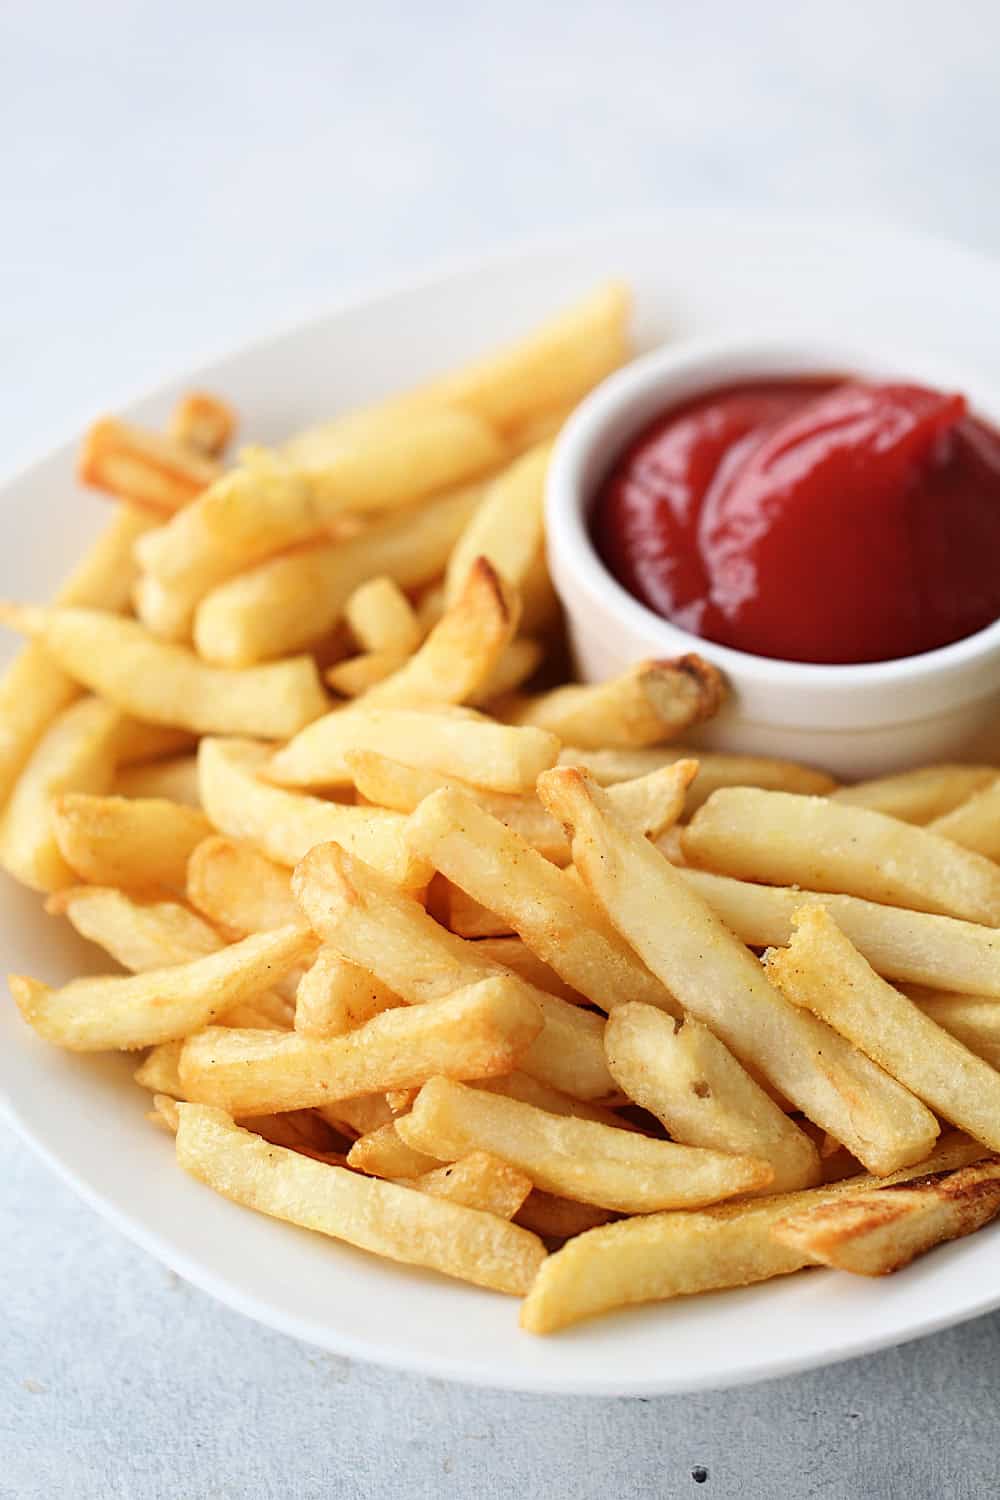 How to Make Frozen French Fries in an Air Fryer